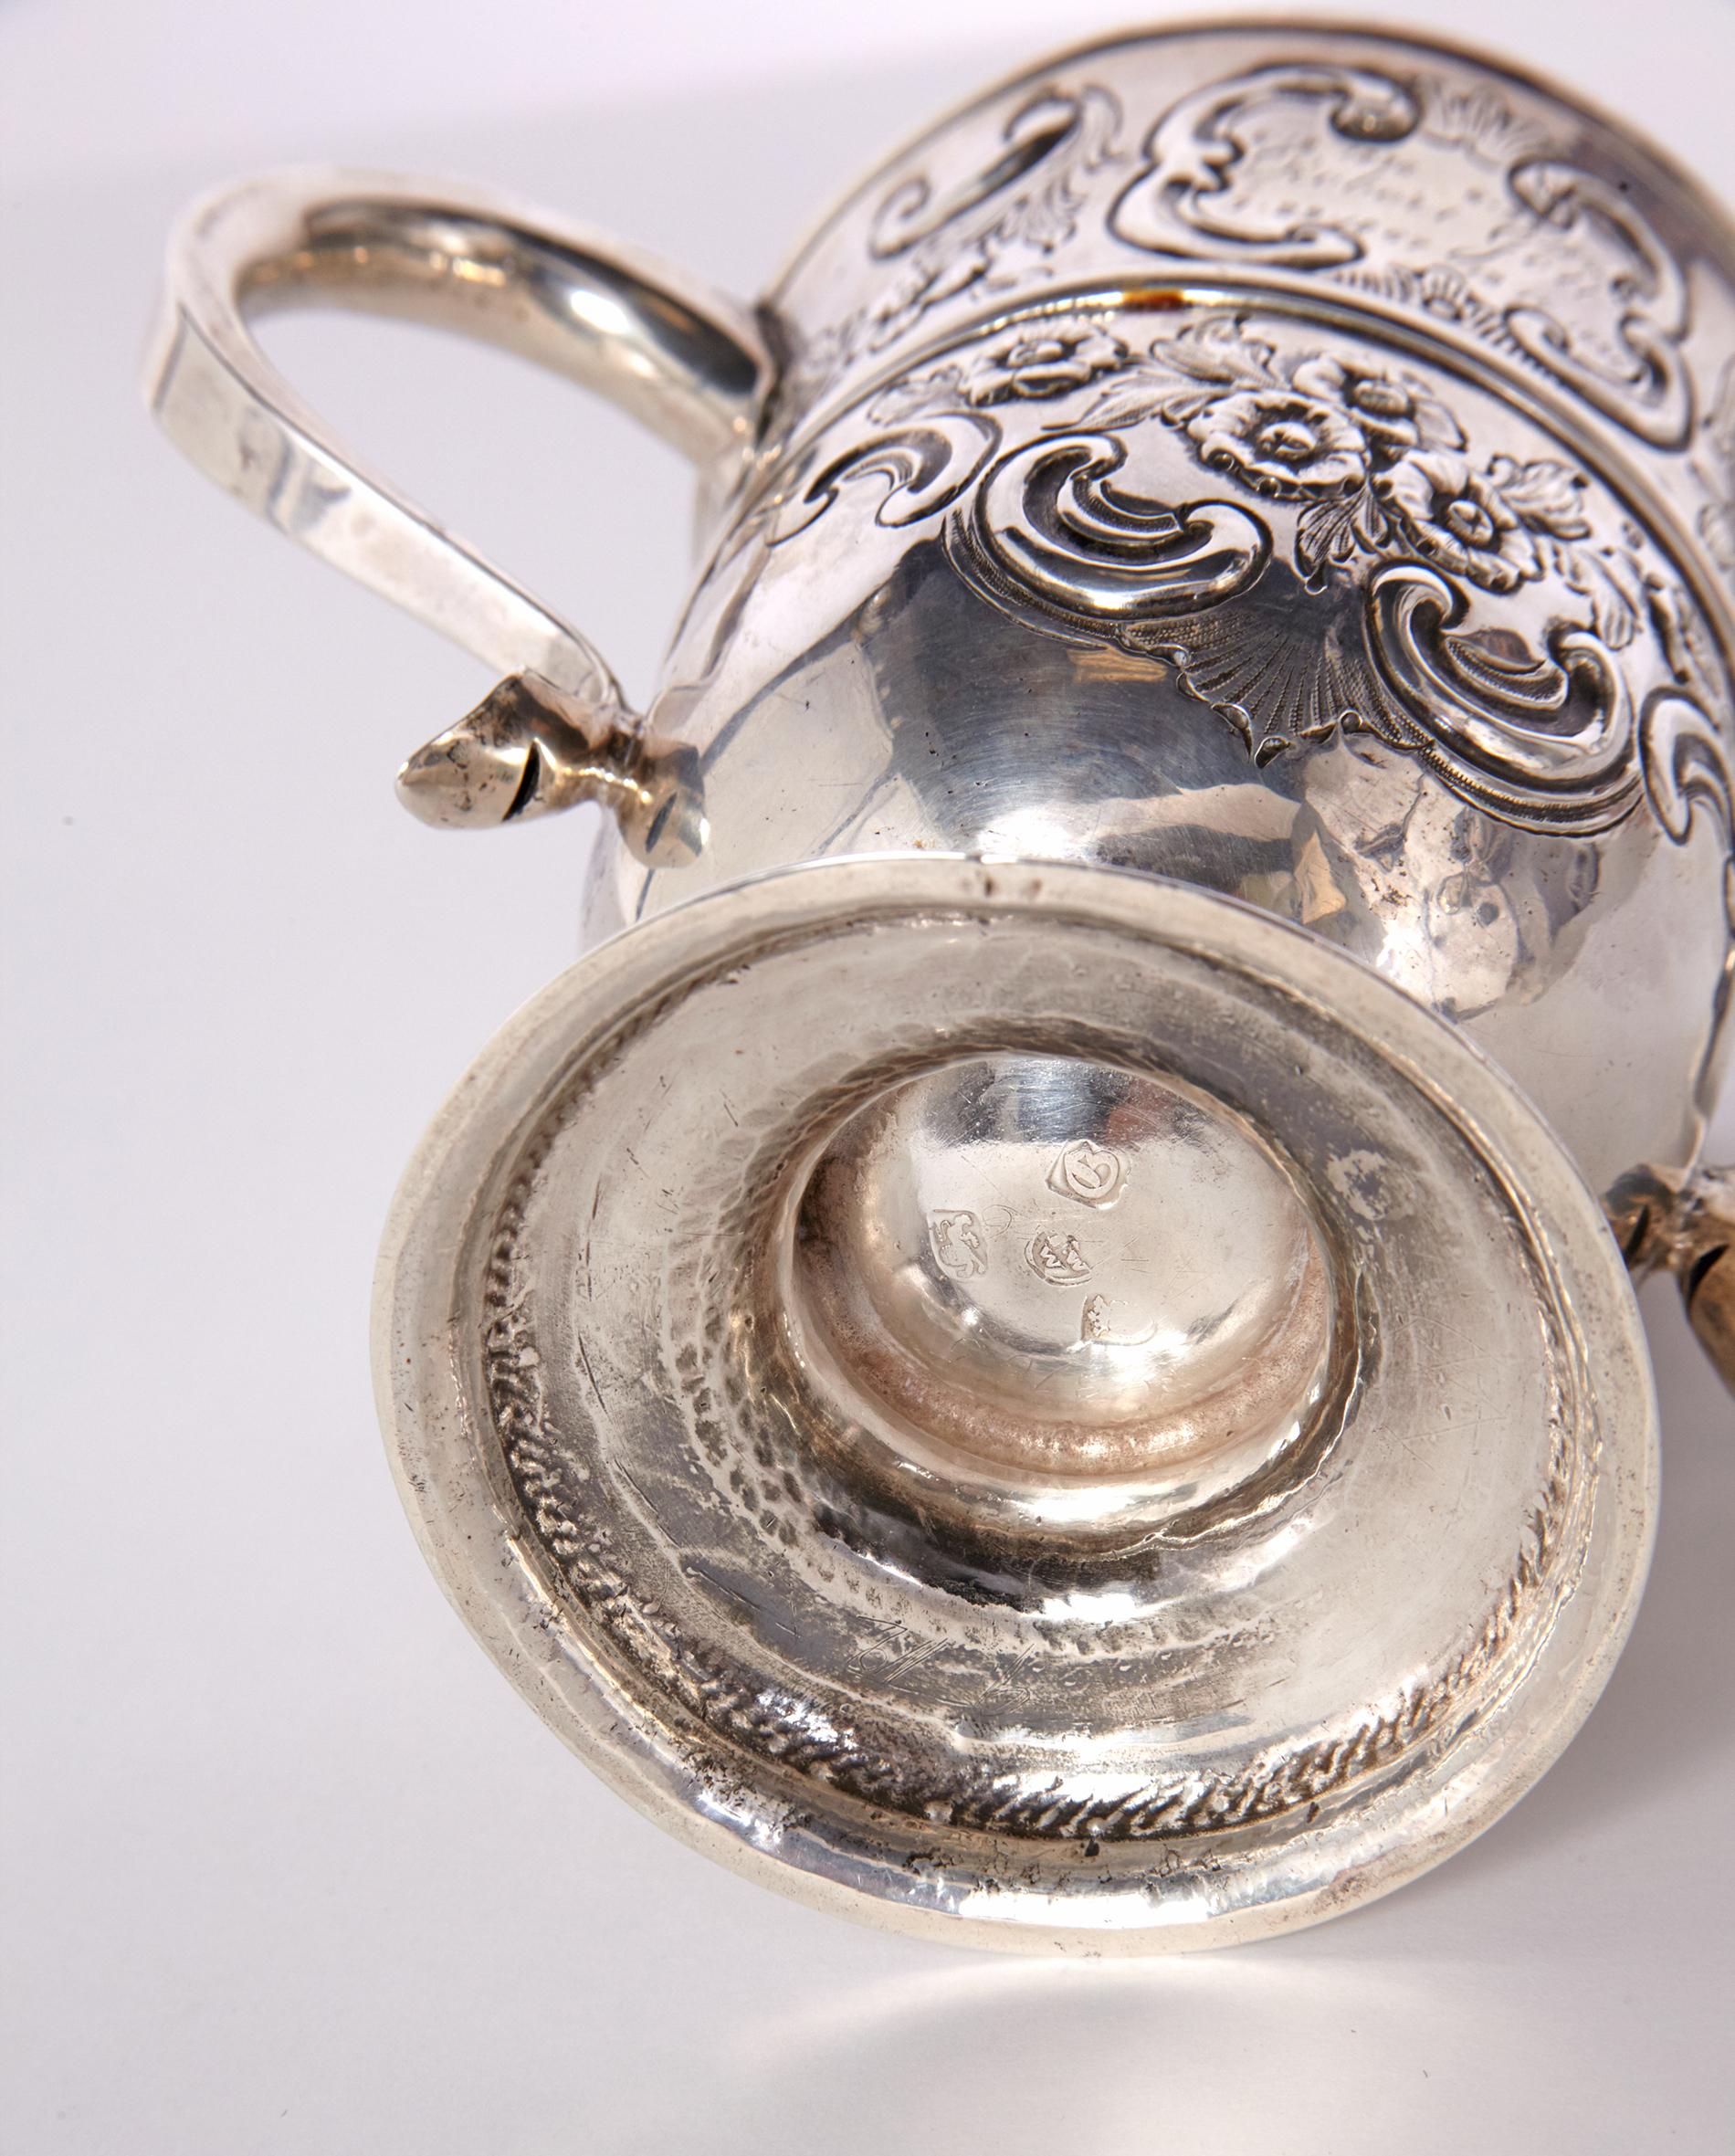 Sterling Silver 2-Handled Loving Cup 1762, London by Thomas Whipham 2